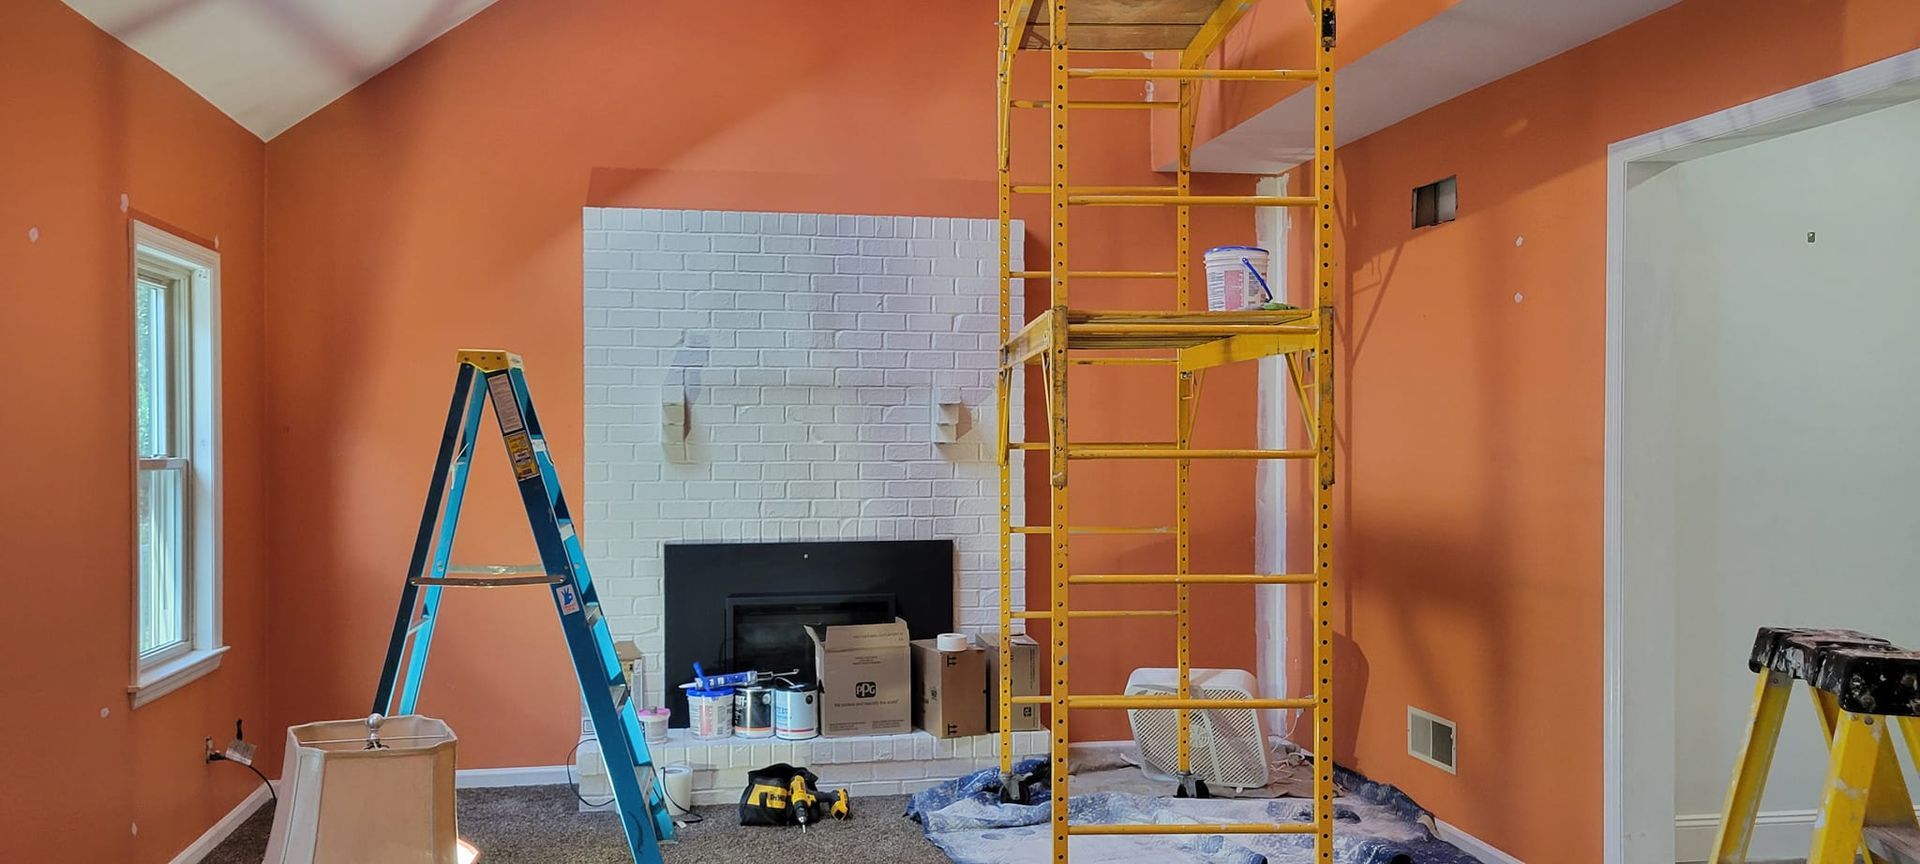 A living room is being painted with orange walls and a fireplace.